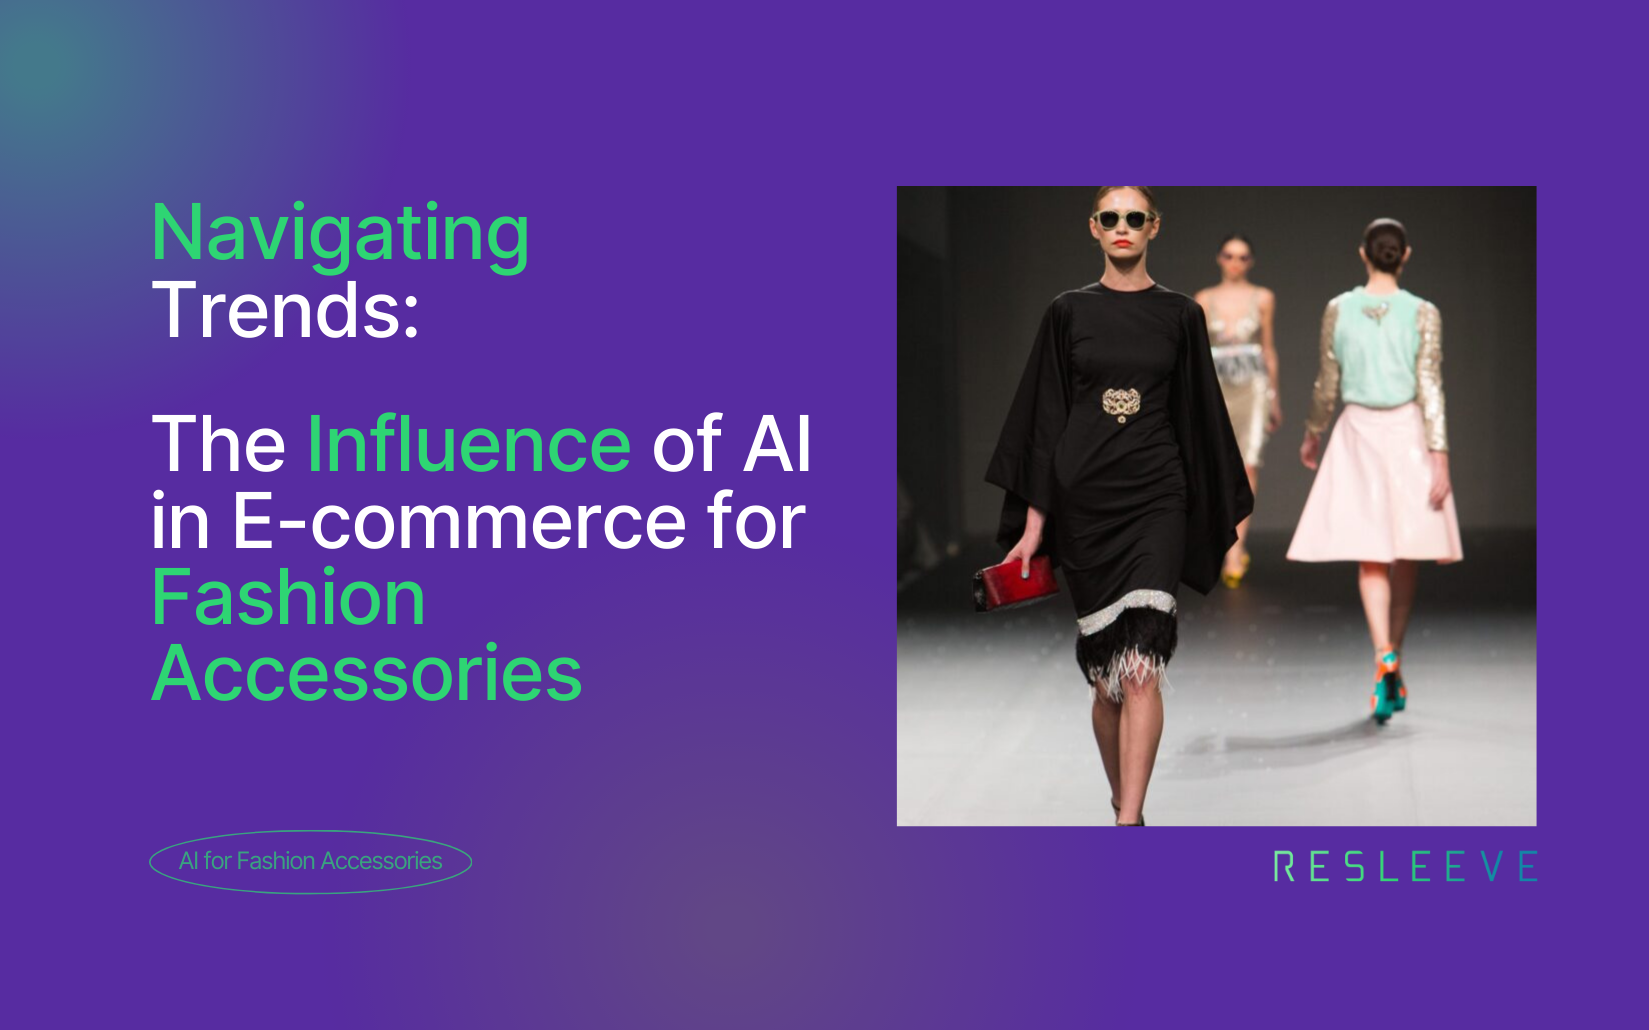 Navigating Trends: The Influence of AI in Ecommerce for Fashion Accessories